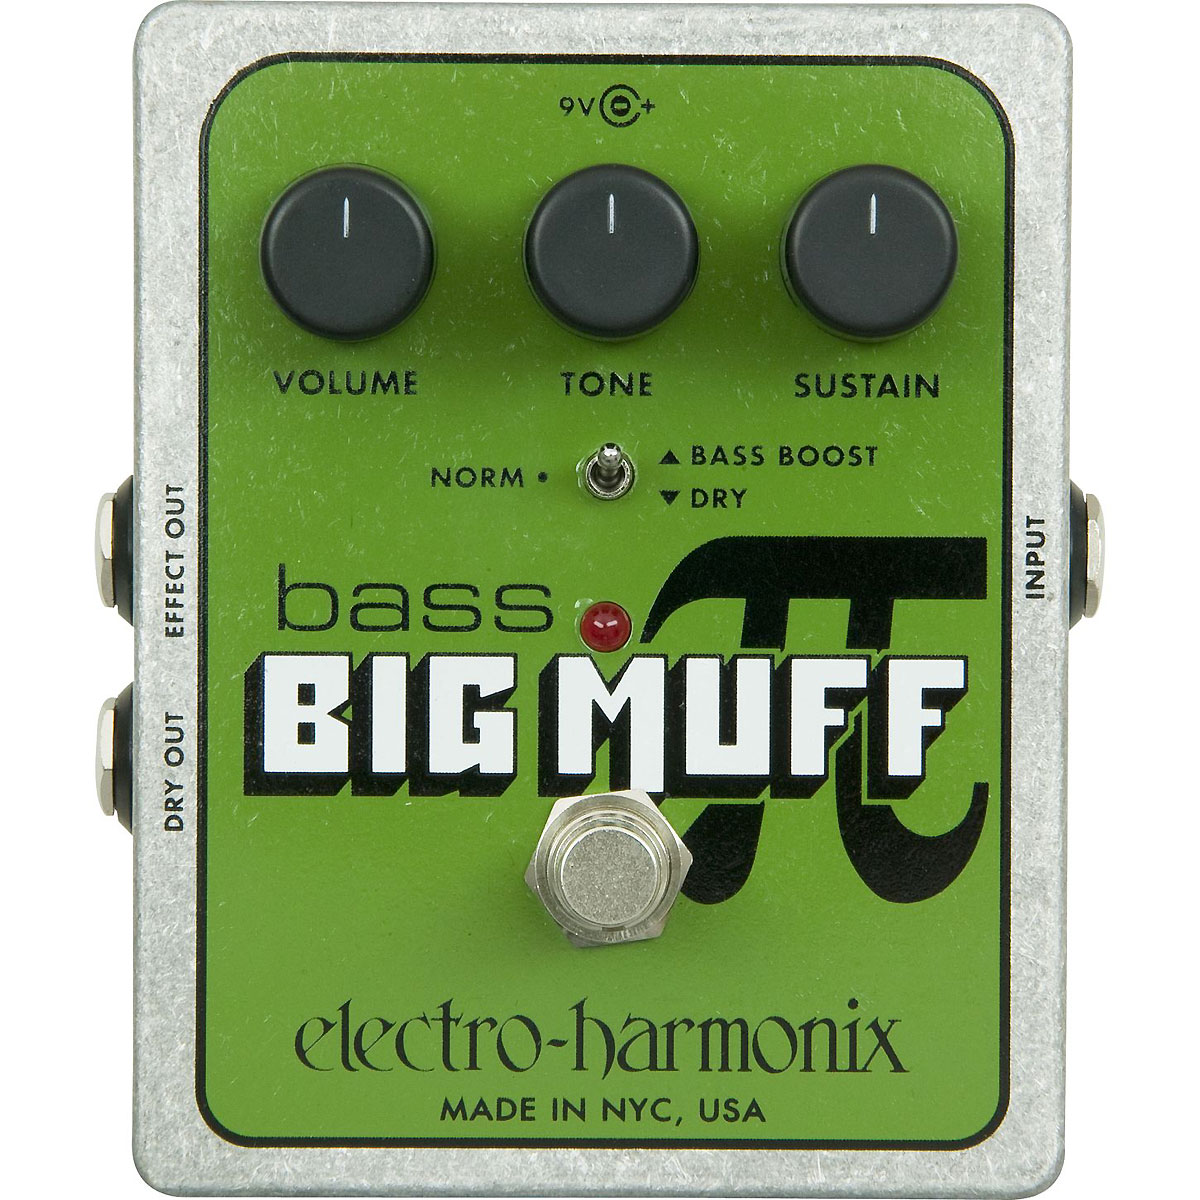 Electro Harmonix Bass Big Muff Pi Distorsion Sustainer - Overdrive, distortion, fuzz effect pedal for bass - Variation 1